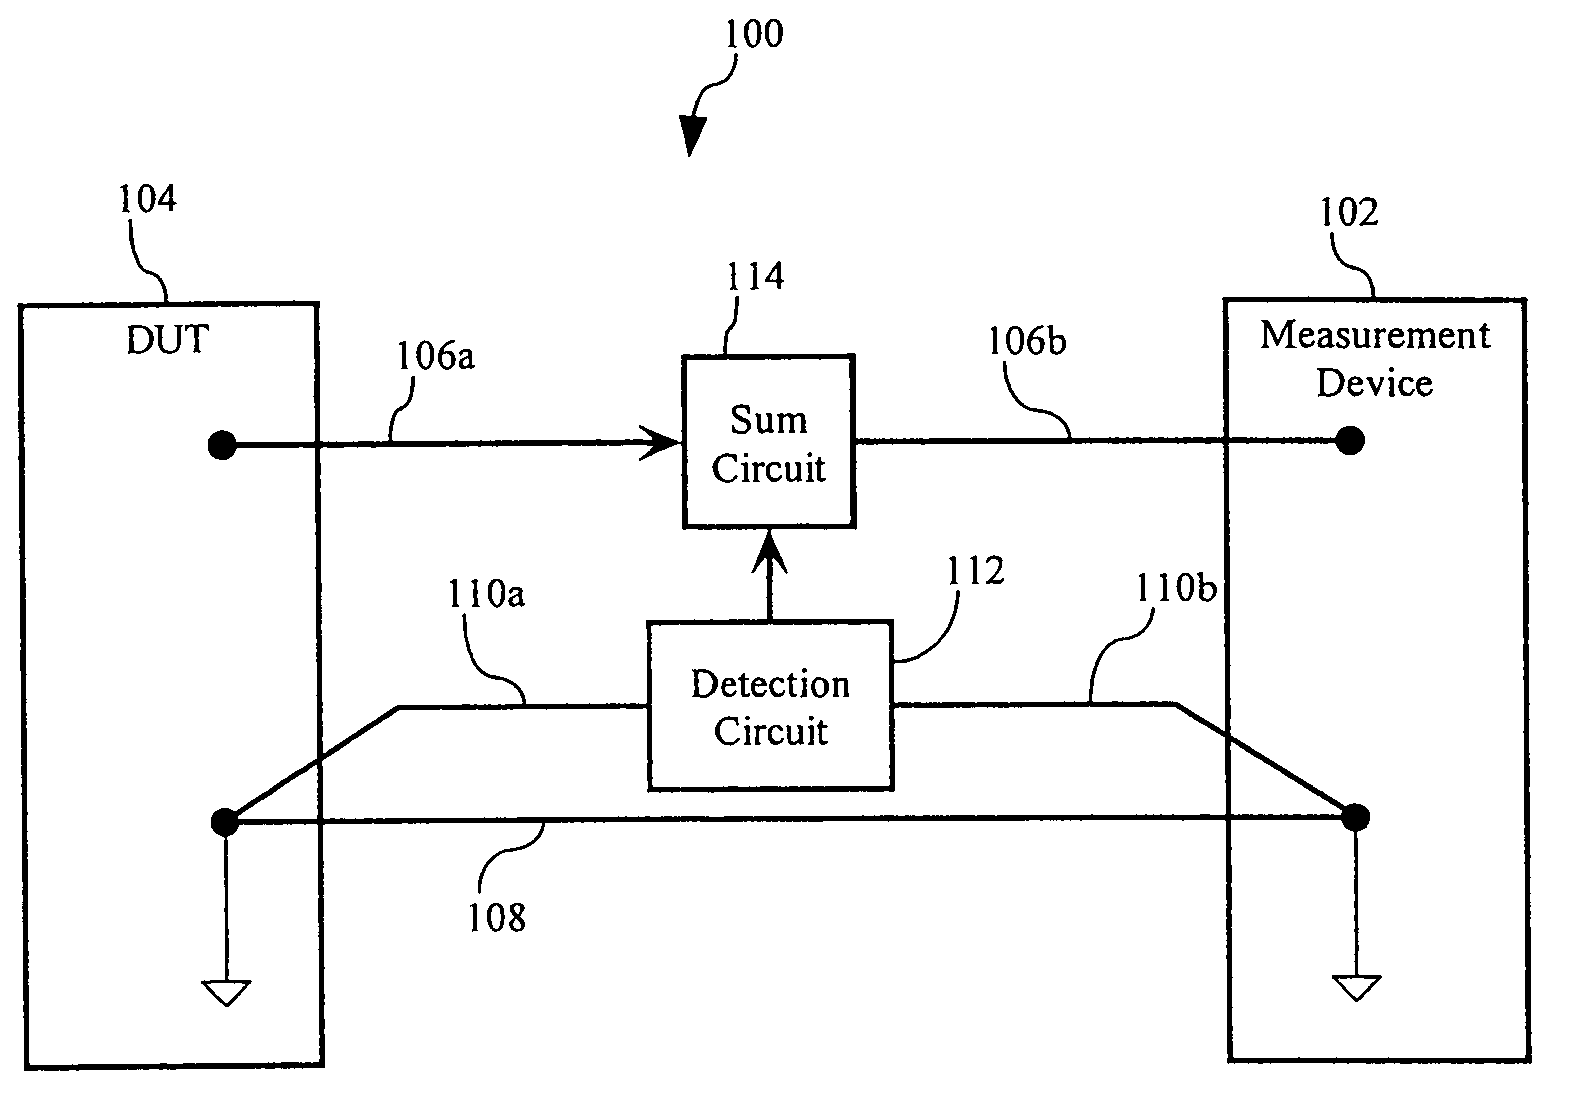 Apparatus and method for canceling DC errors and noise generated by ground shield current in a probe